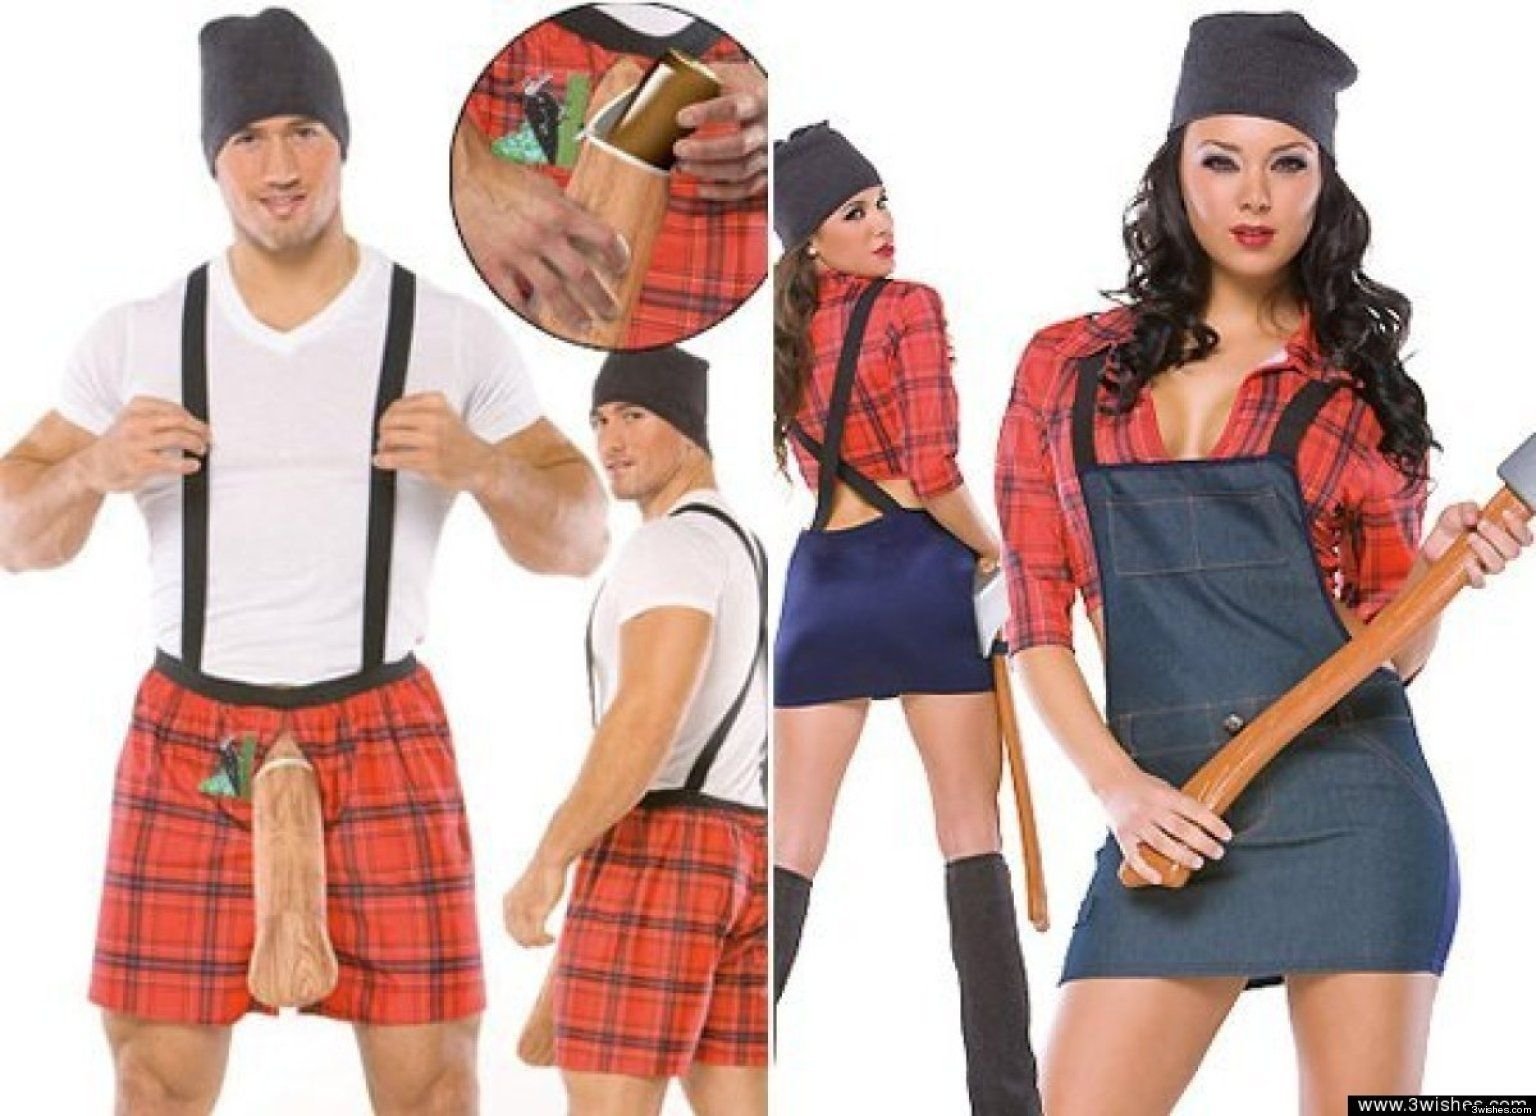 10 Wonderful Good Ideas For Halloween Costumes look 5 extremely awkward couples costumes costumes couple 10 2022